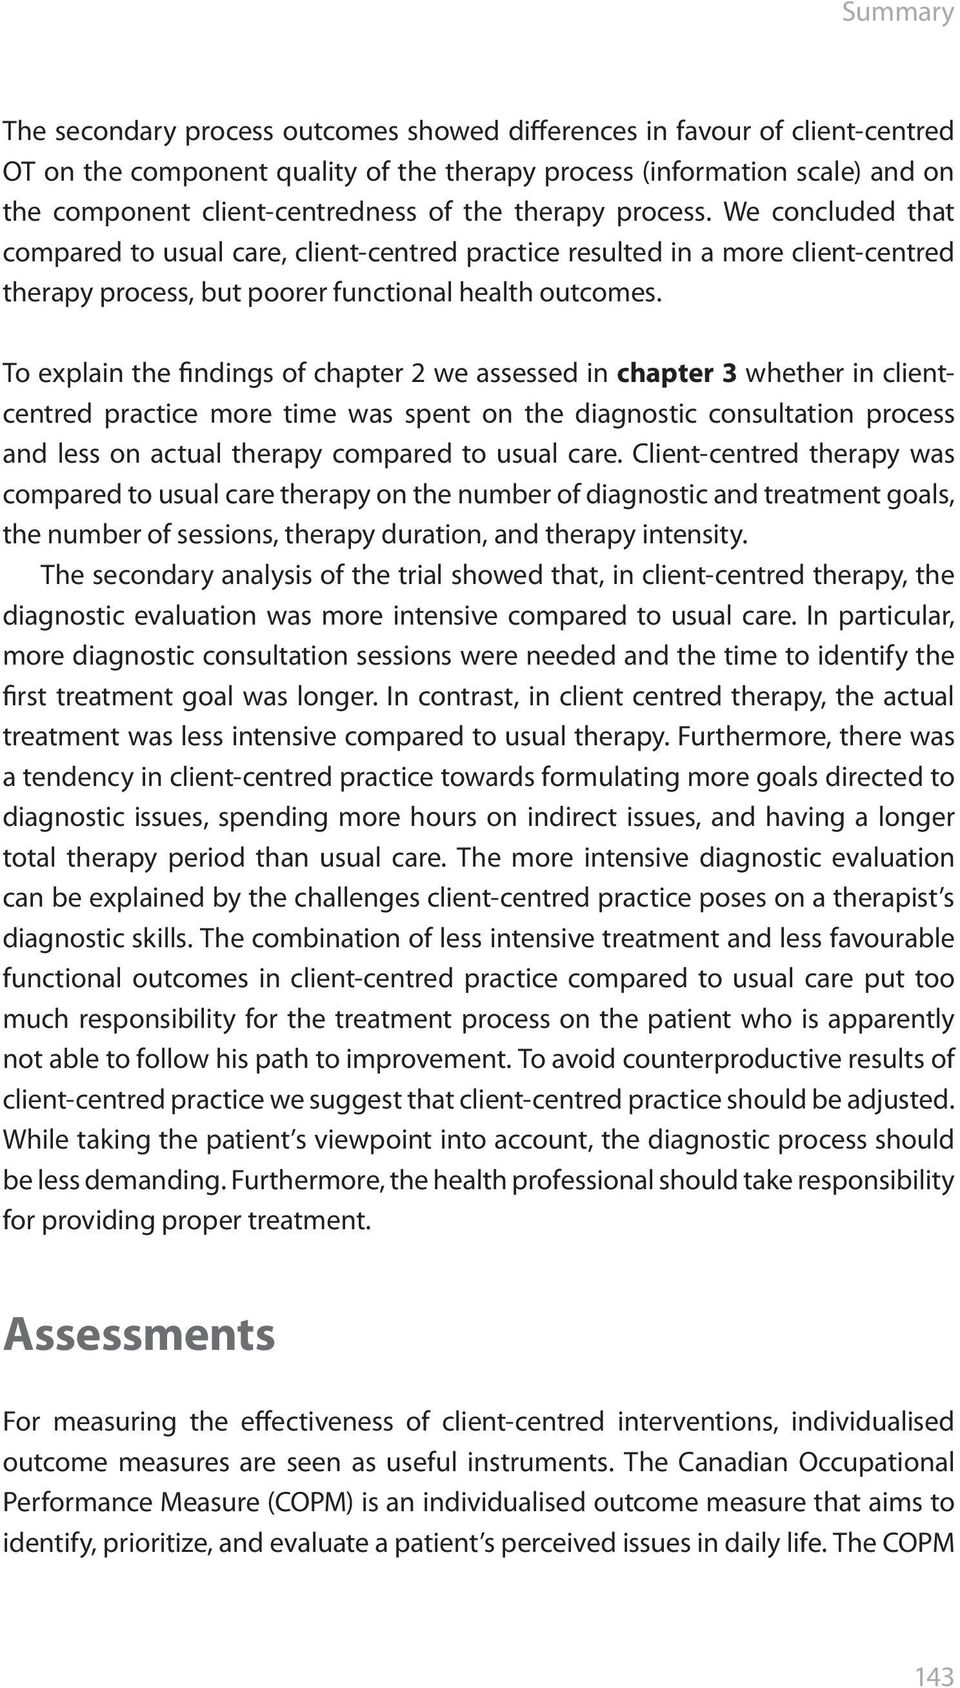 To explain the findings of chapter 2 we assessed in chapter 3 whether in clientcentred practice more time was spent on the diagnostic consultation process and less on actual therapy compared to usual